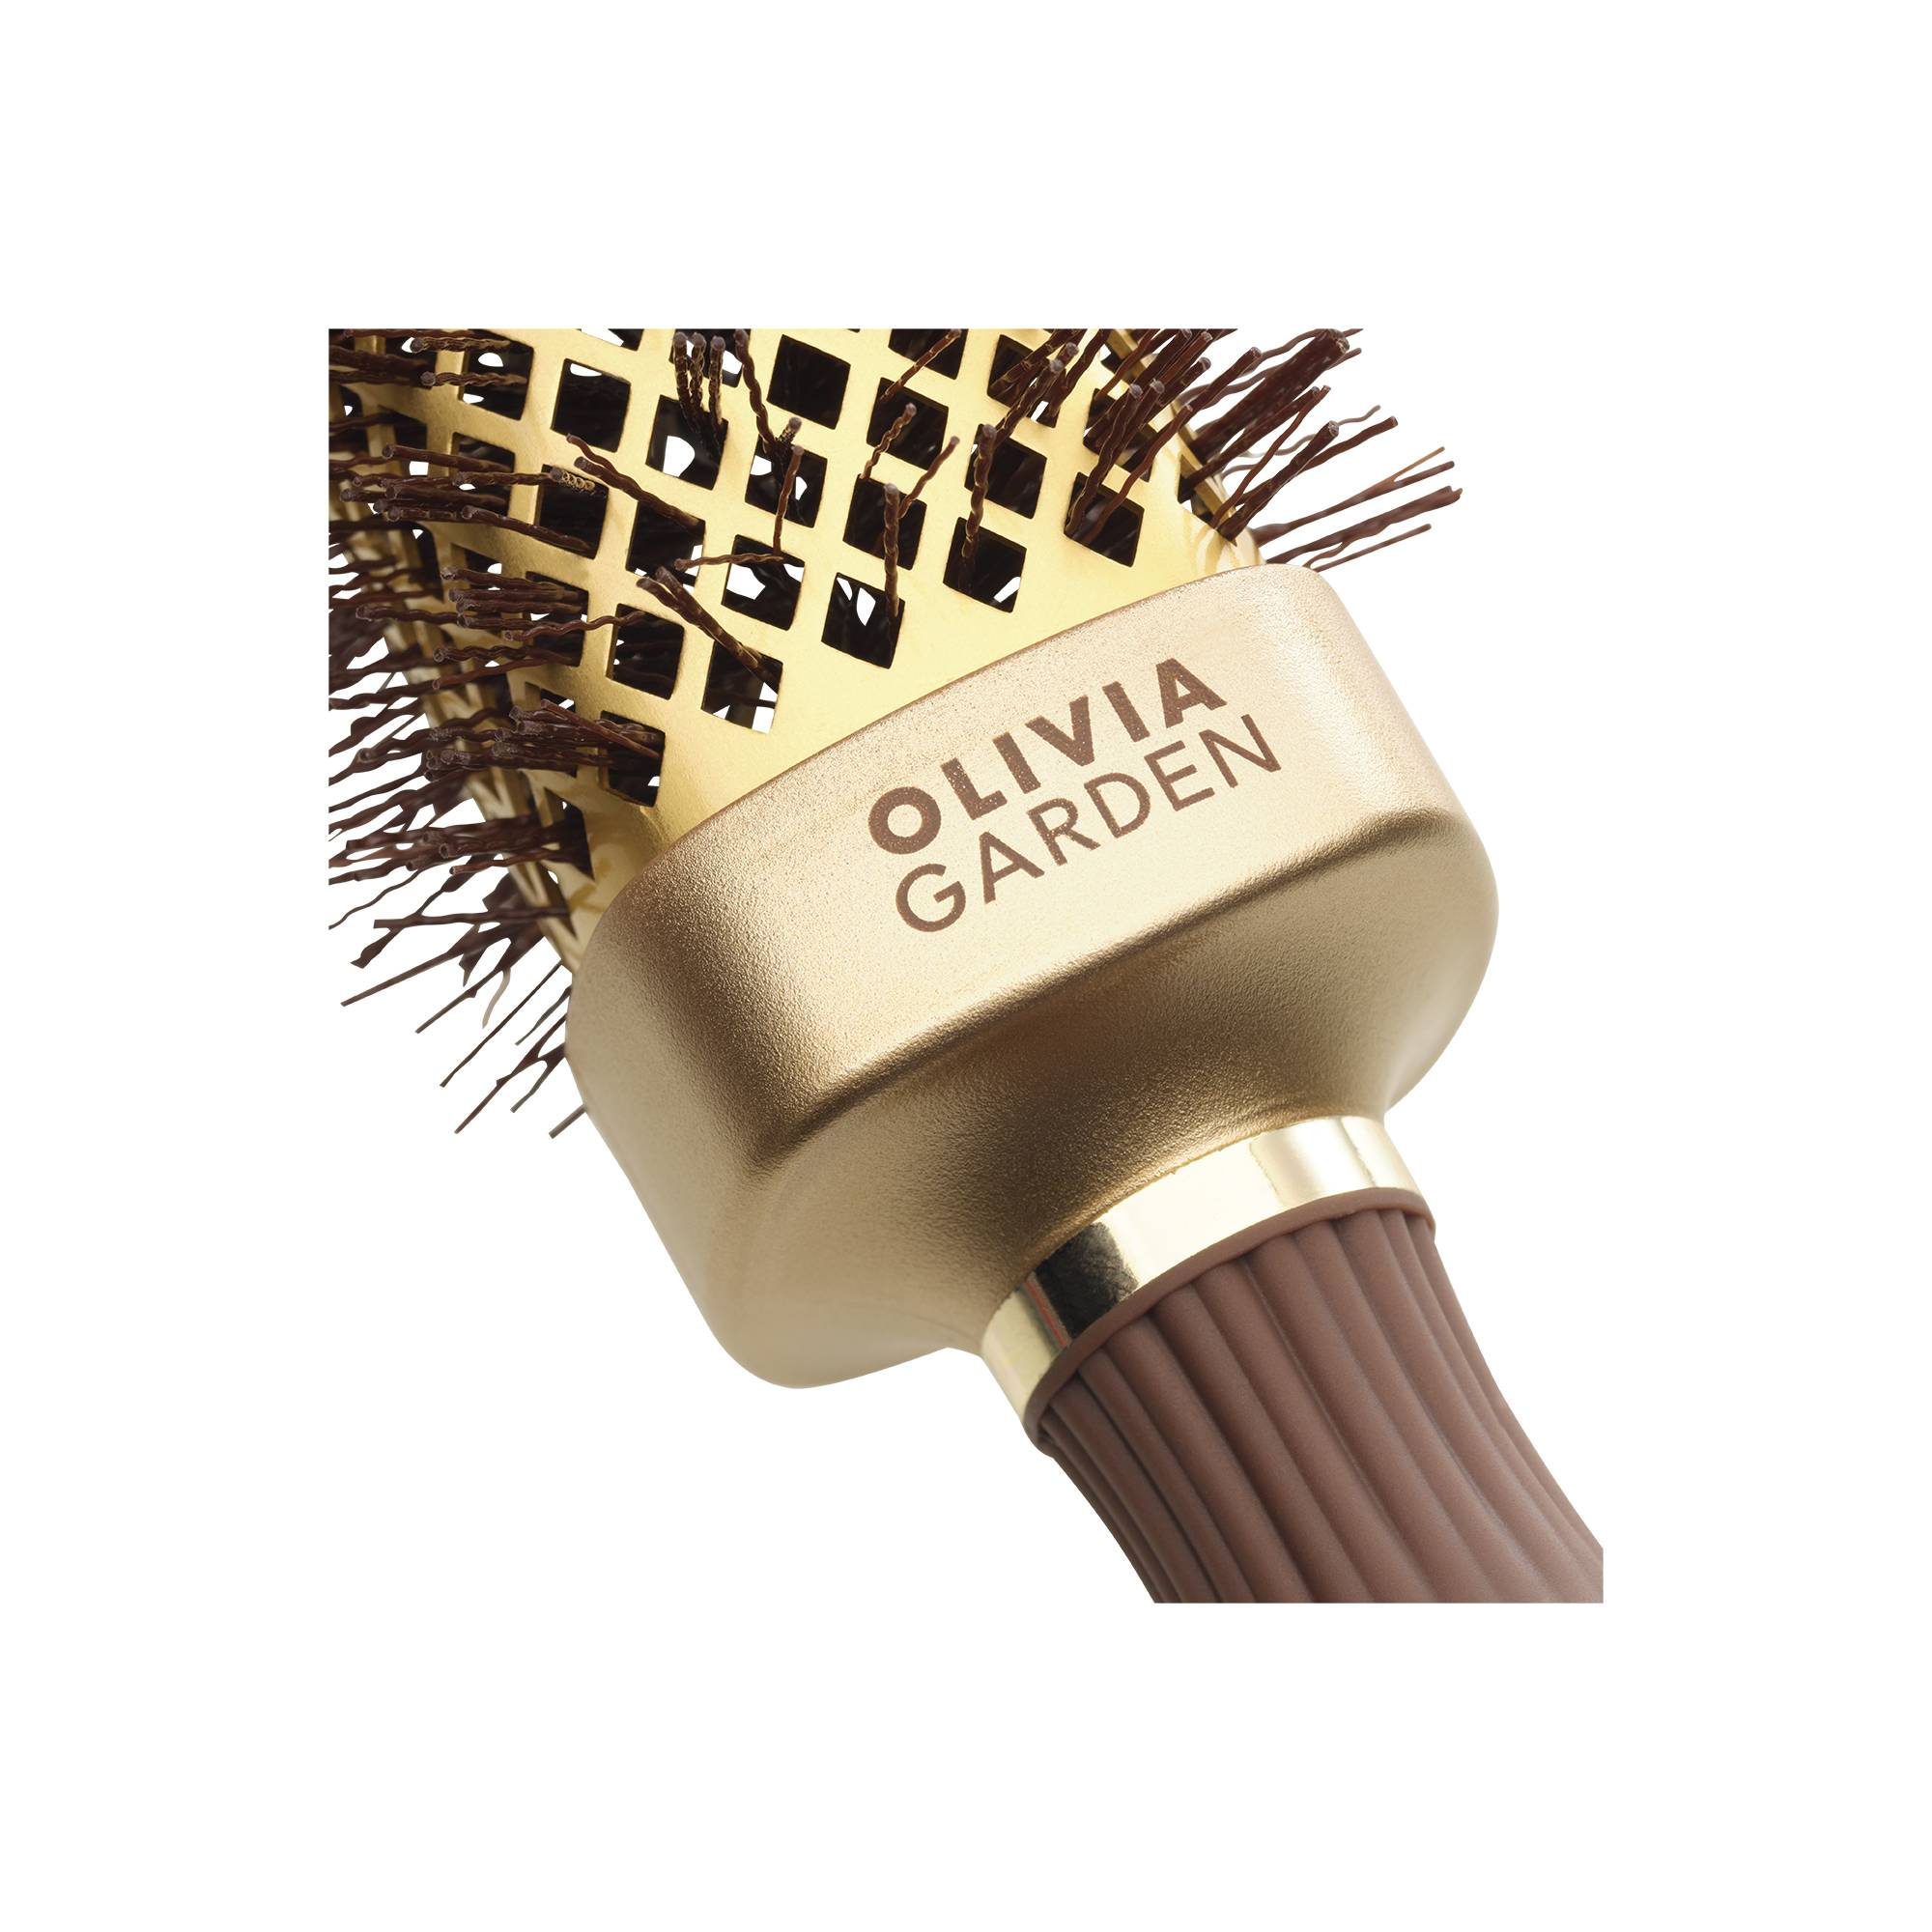 Spazzola per il brushing Expert Blowout Straight Wavy Bristle Gold&Brown 40mm del marchio Olivia Garden - 3